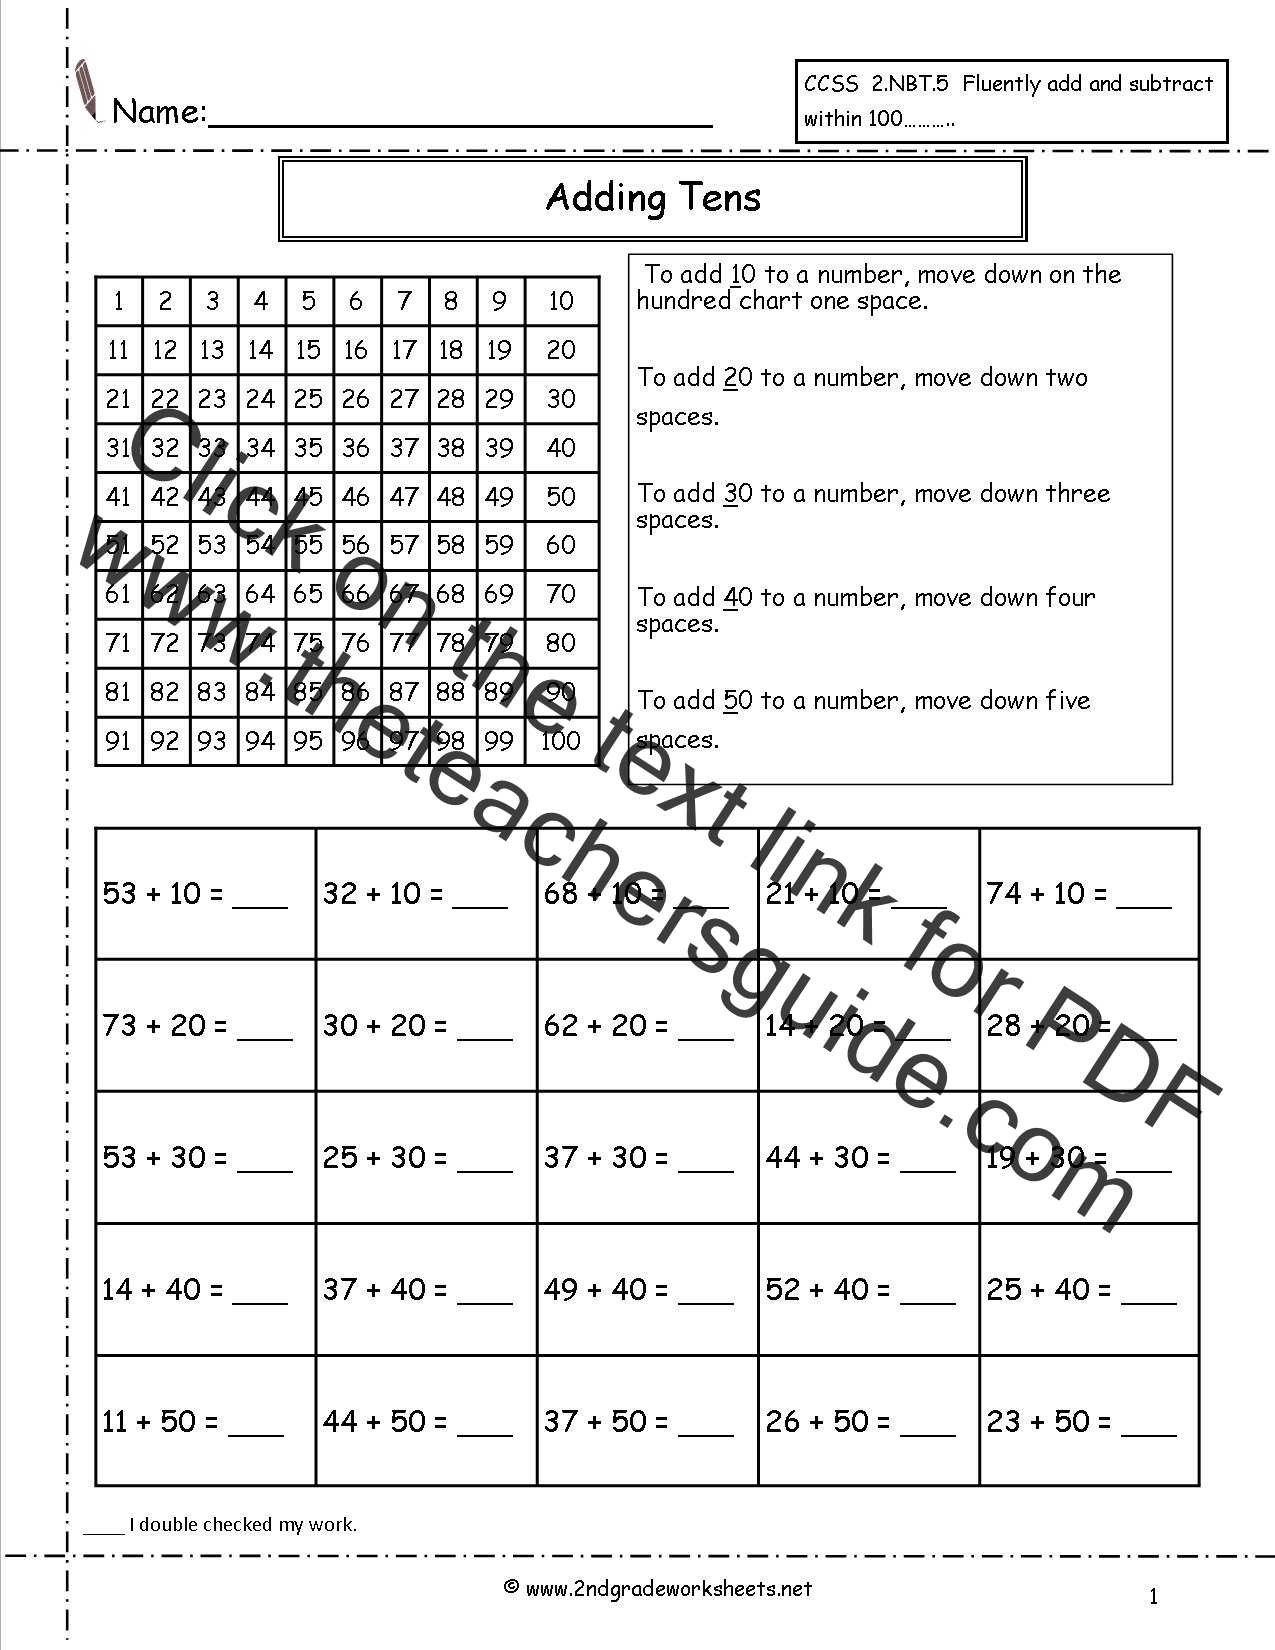 addition-worksheets-by-2